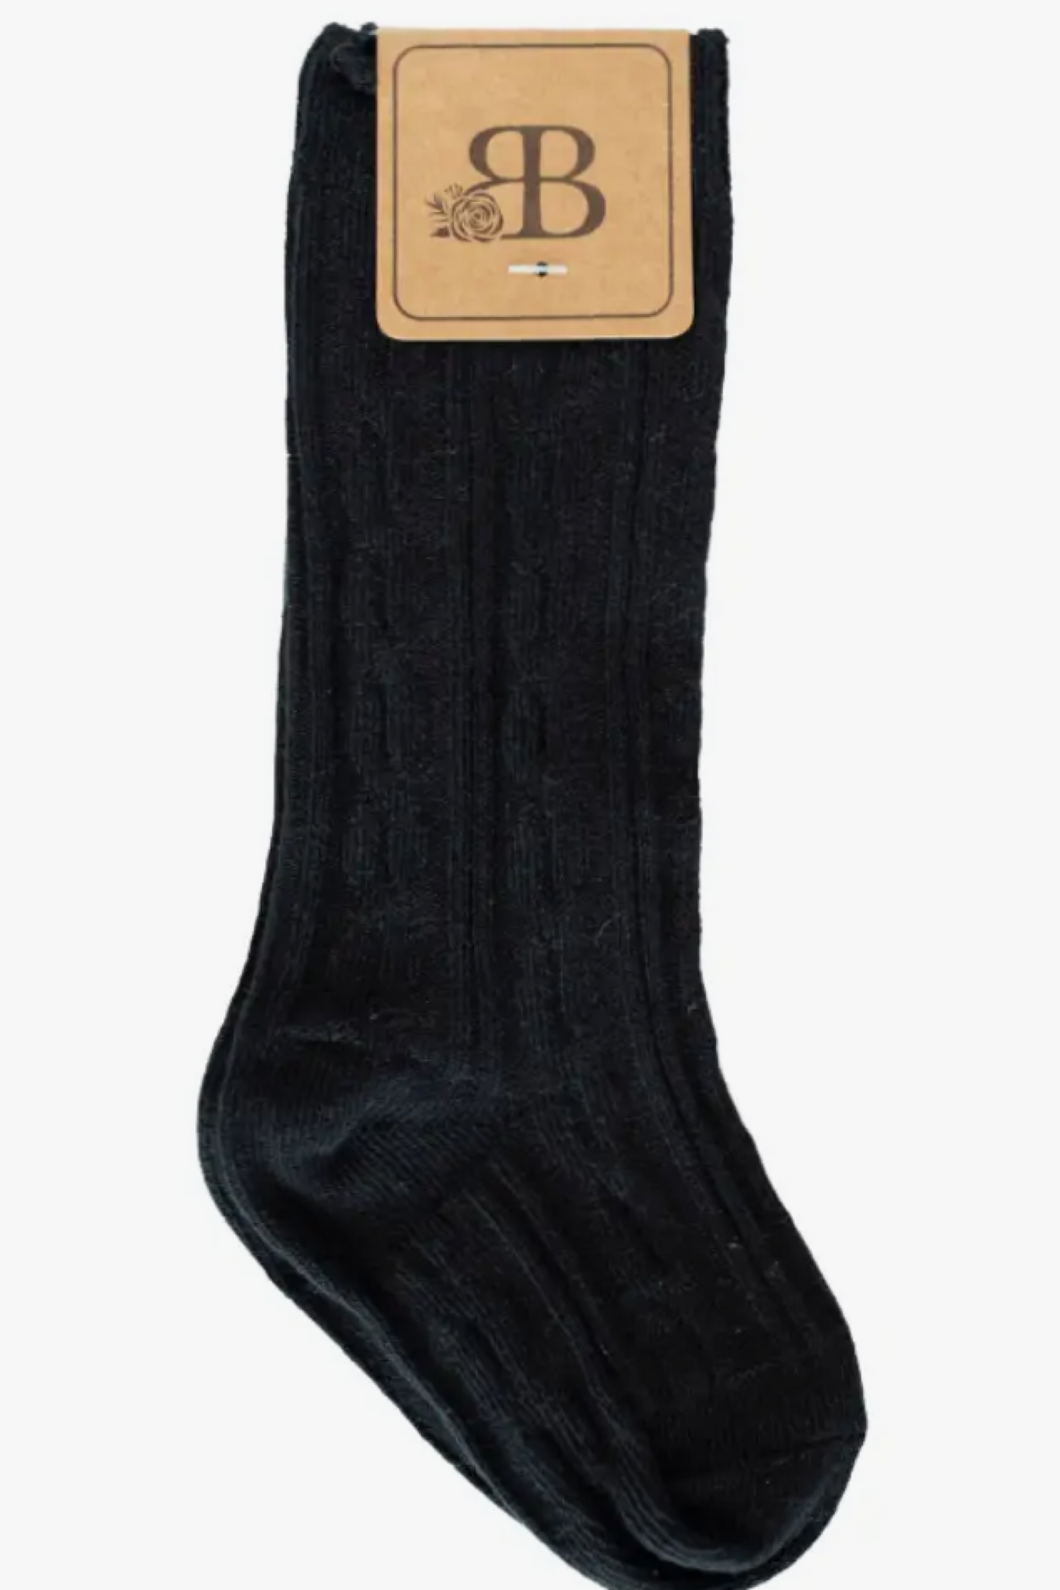 PEPPER KNEE-HIGH CABLE KNIT SOCKS